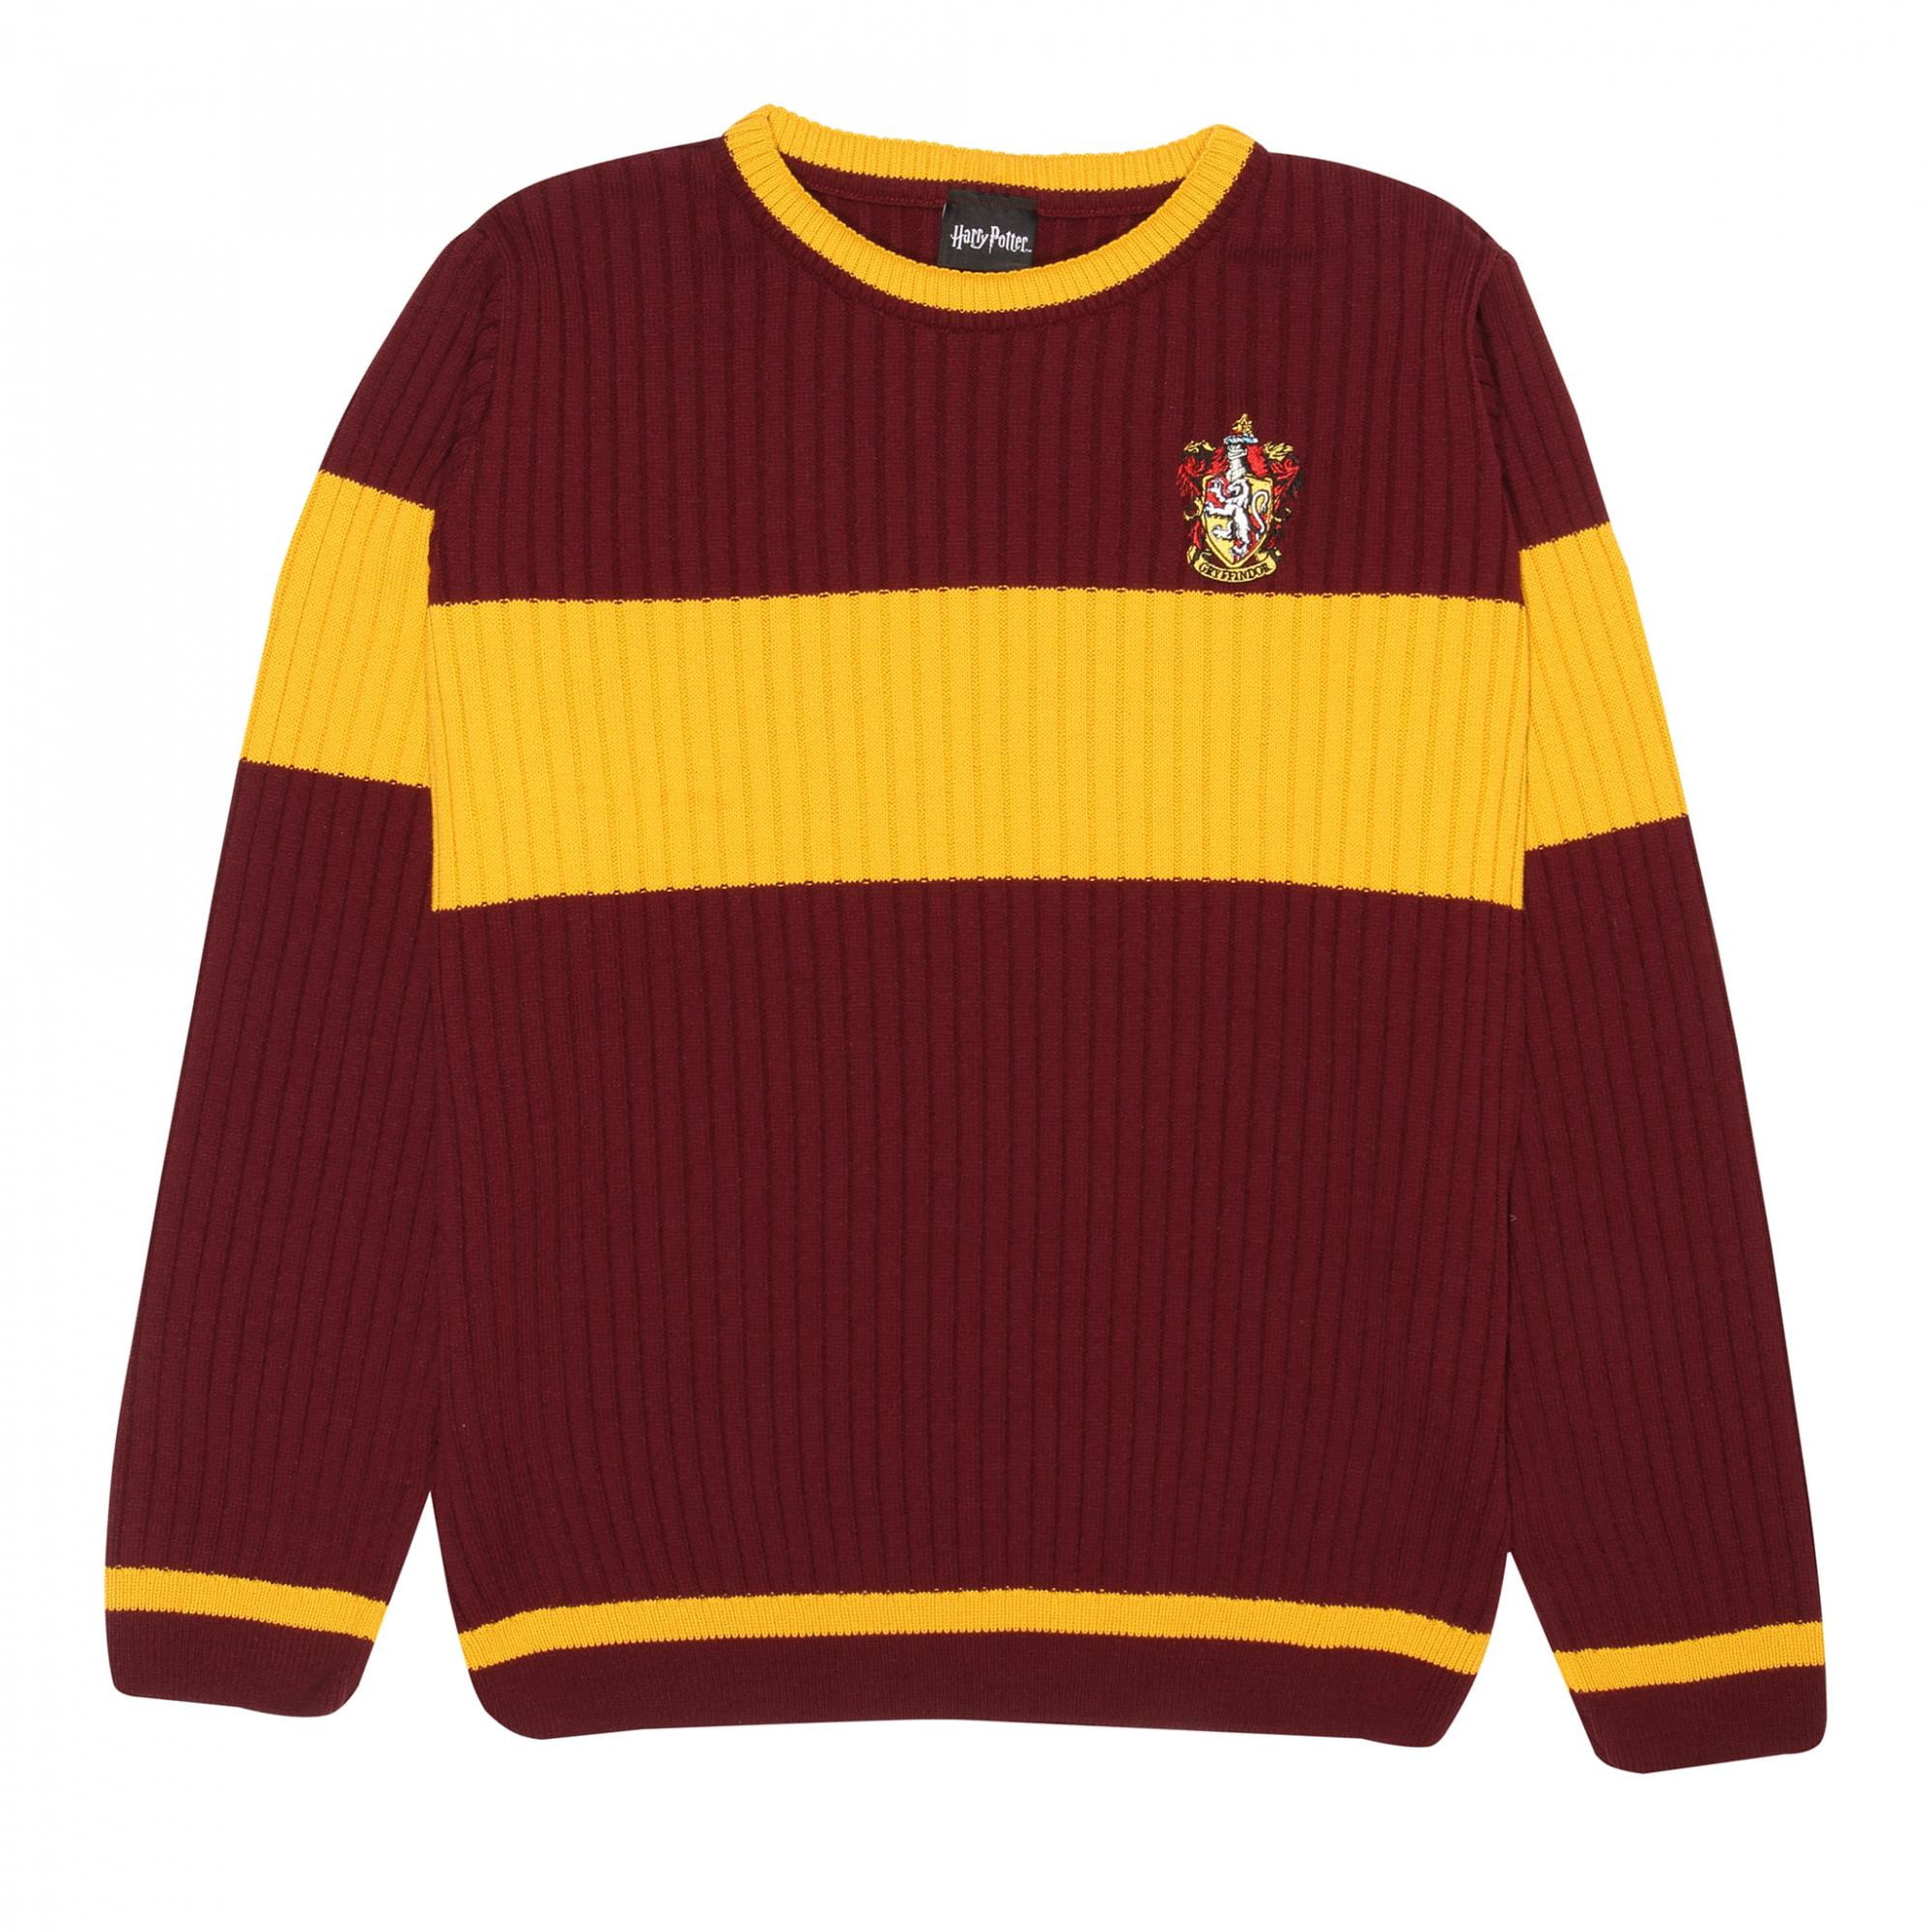 Gryffindor Sweatshirt Famous Novel Shirts Gryffindor Quidditch Hoodie or Crew Sweatshirt Front and Back Design with Personalized Name